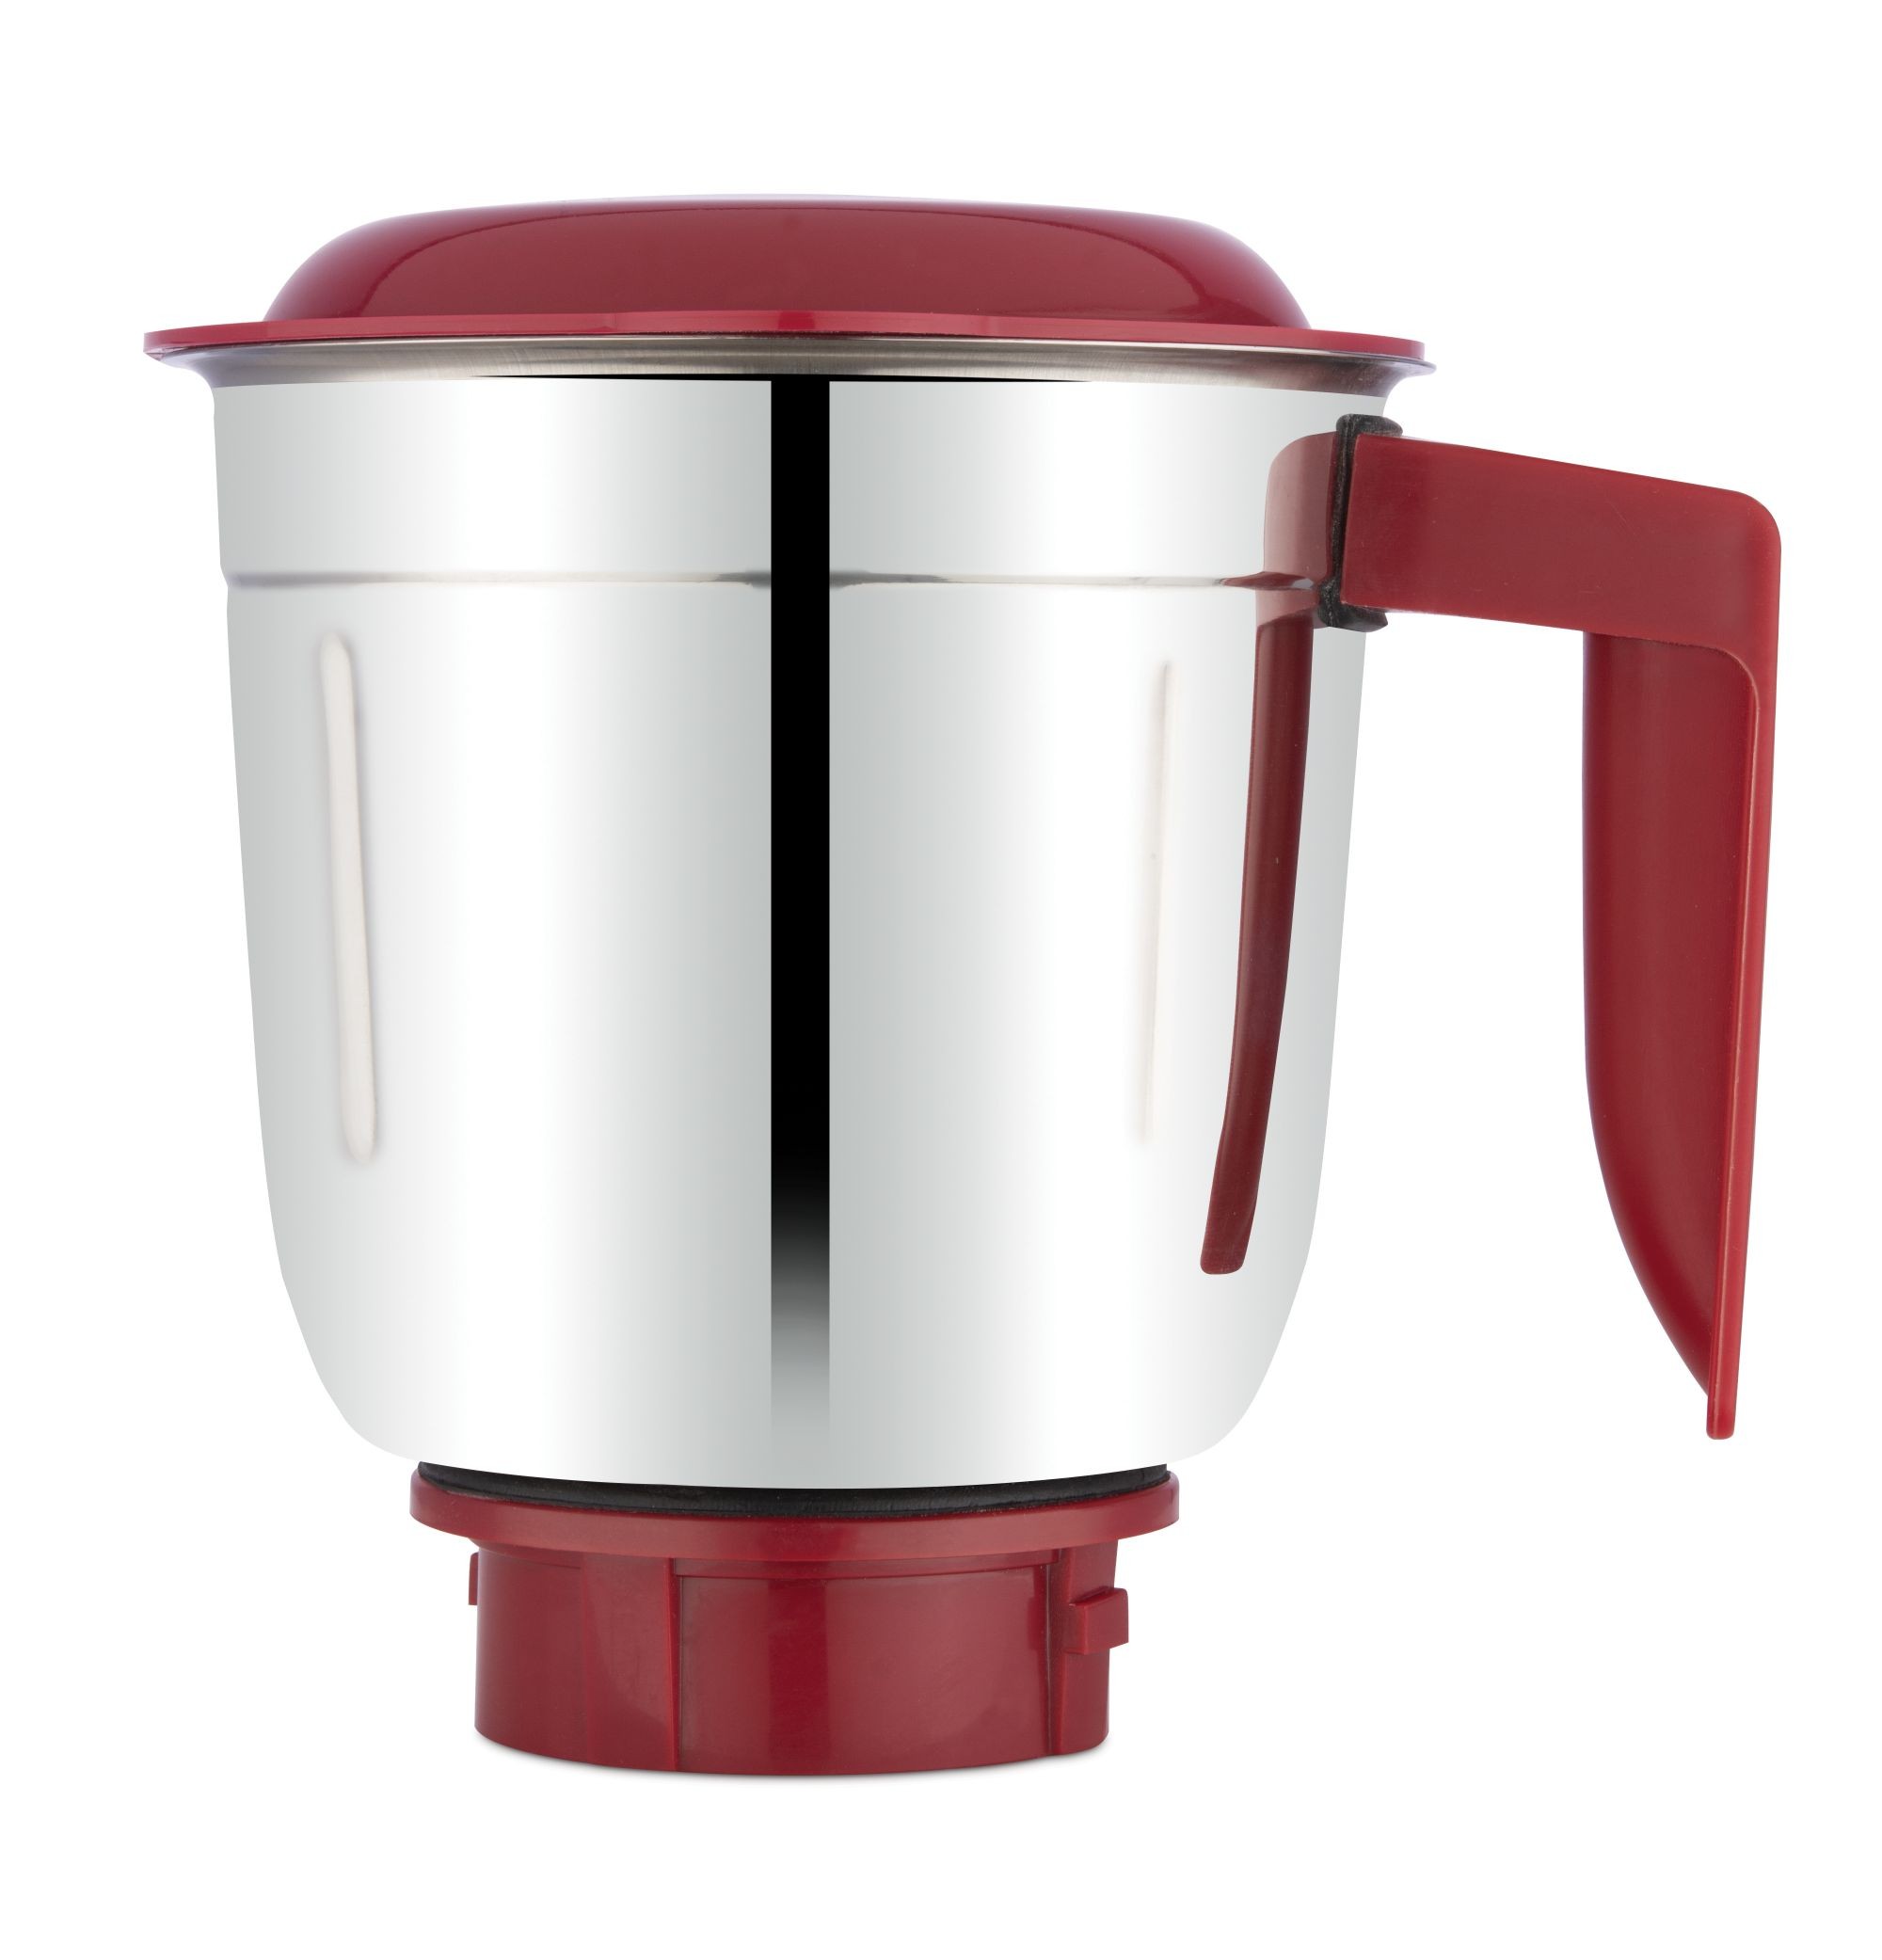 bajaj-classic-indian-mixer-grinder-600w-stainless-steel-jars-indian-mixer-grinder-spice-coffee-grinder-110v-for-use-in-canada-usa11